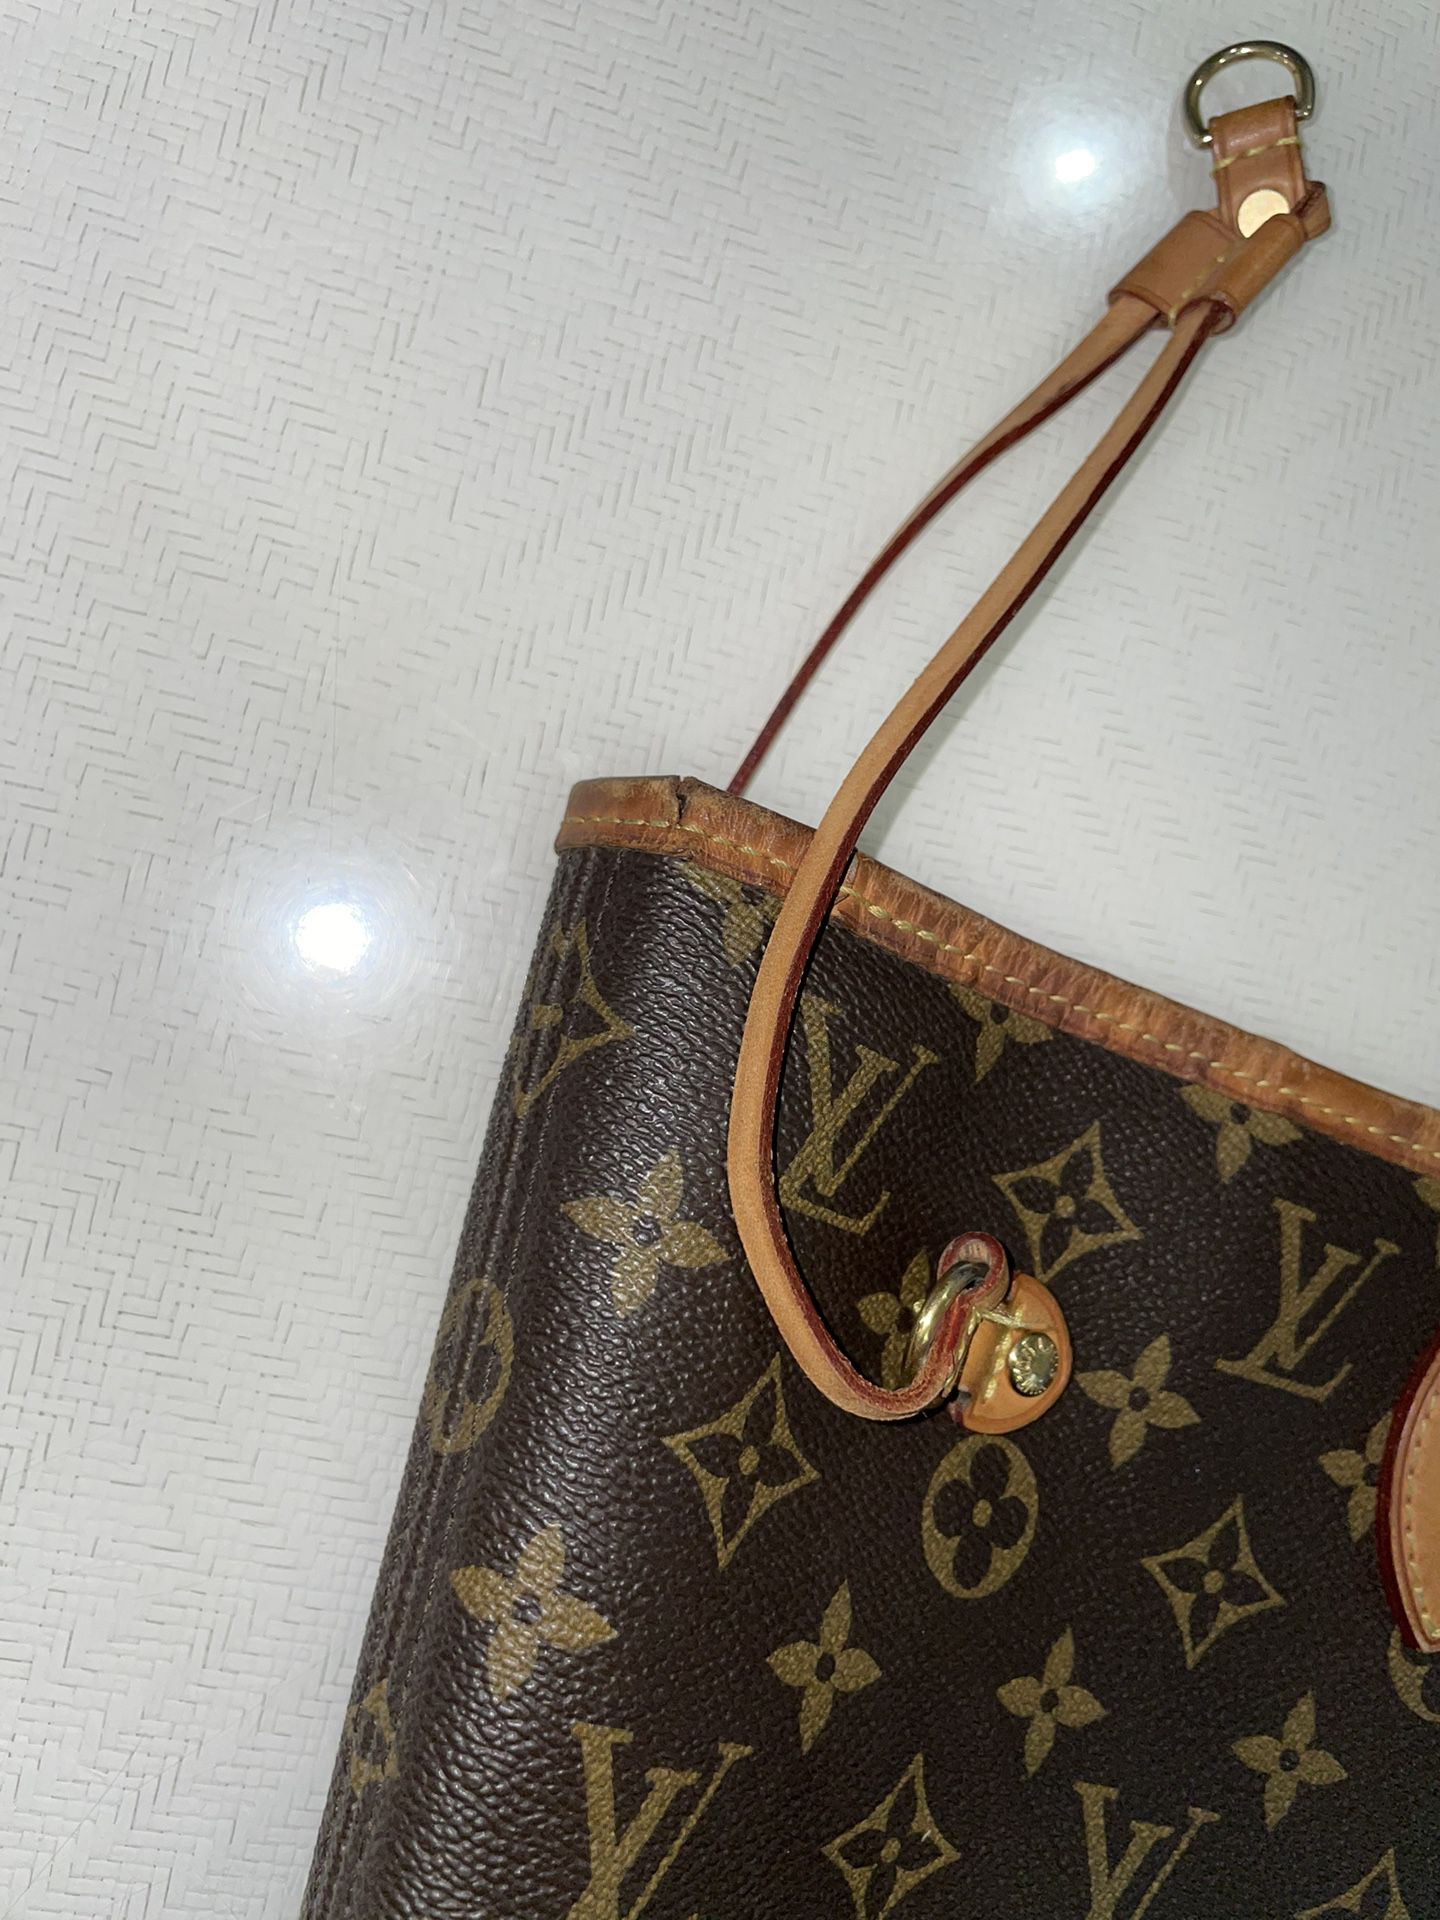 Louis Vuitton Neverfull Mm for Sale in Clearwater, FL - OfferUp